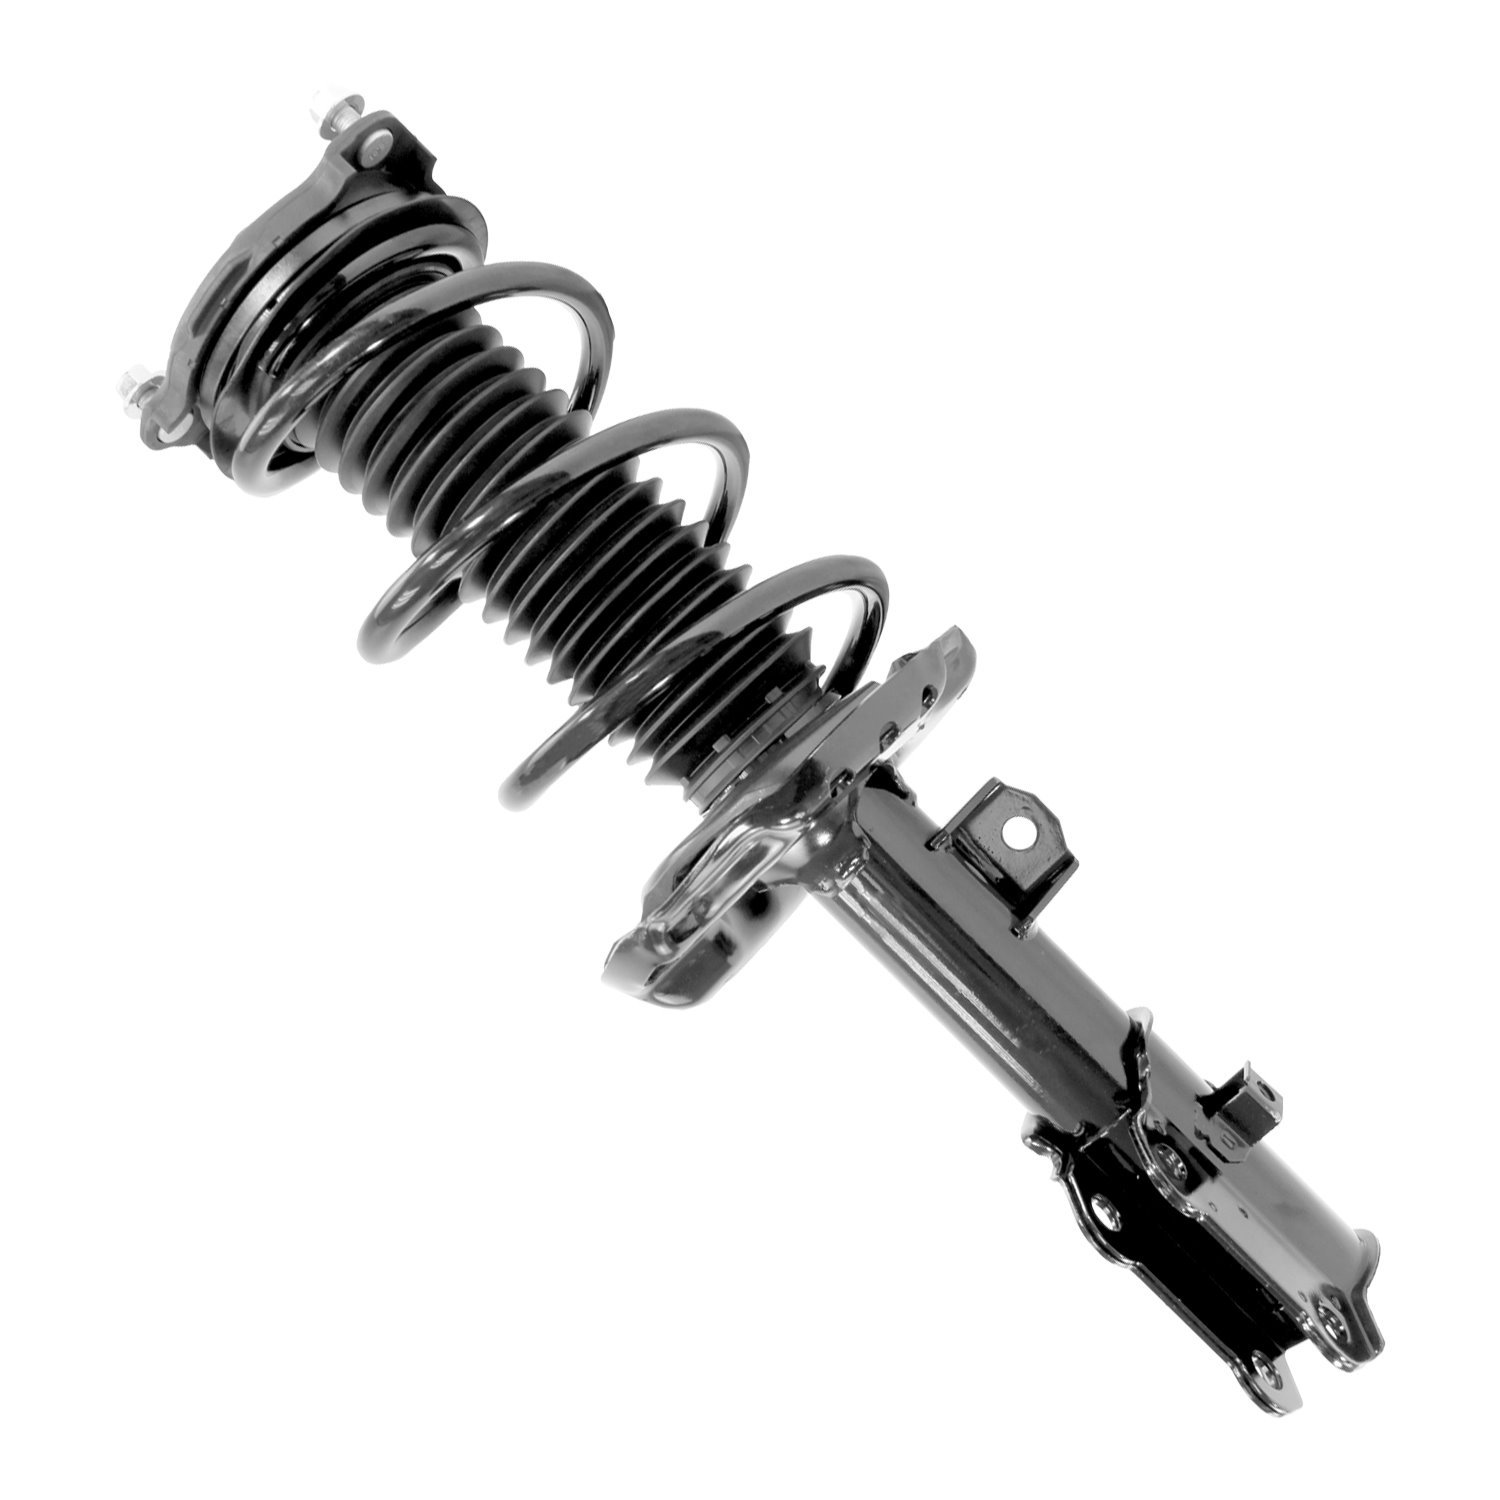 13584 Front Suspension Strut & Coil Spring Assemby Fits Select Hyundai Elantra